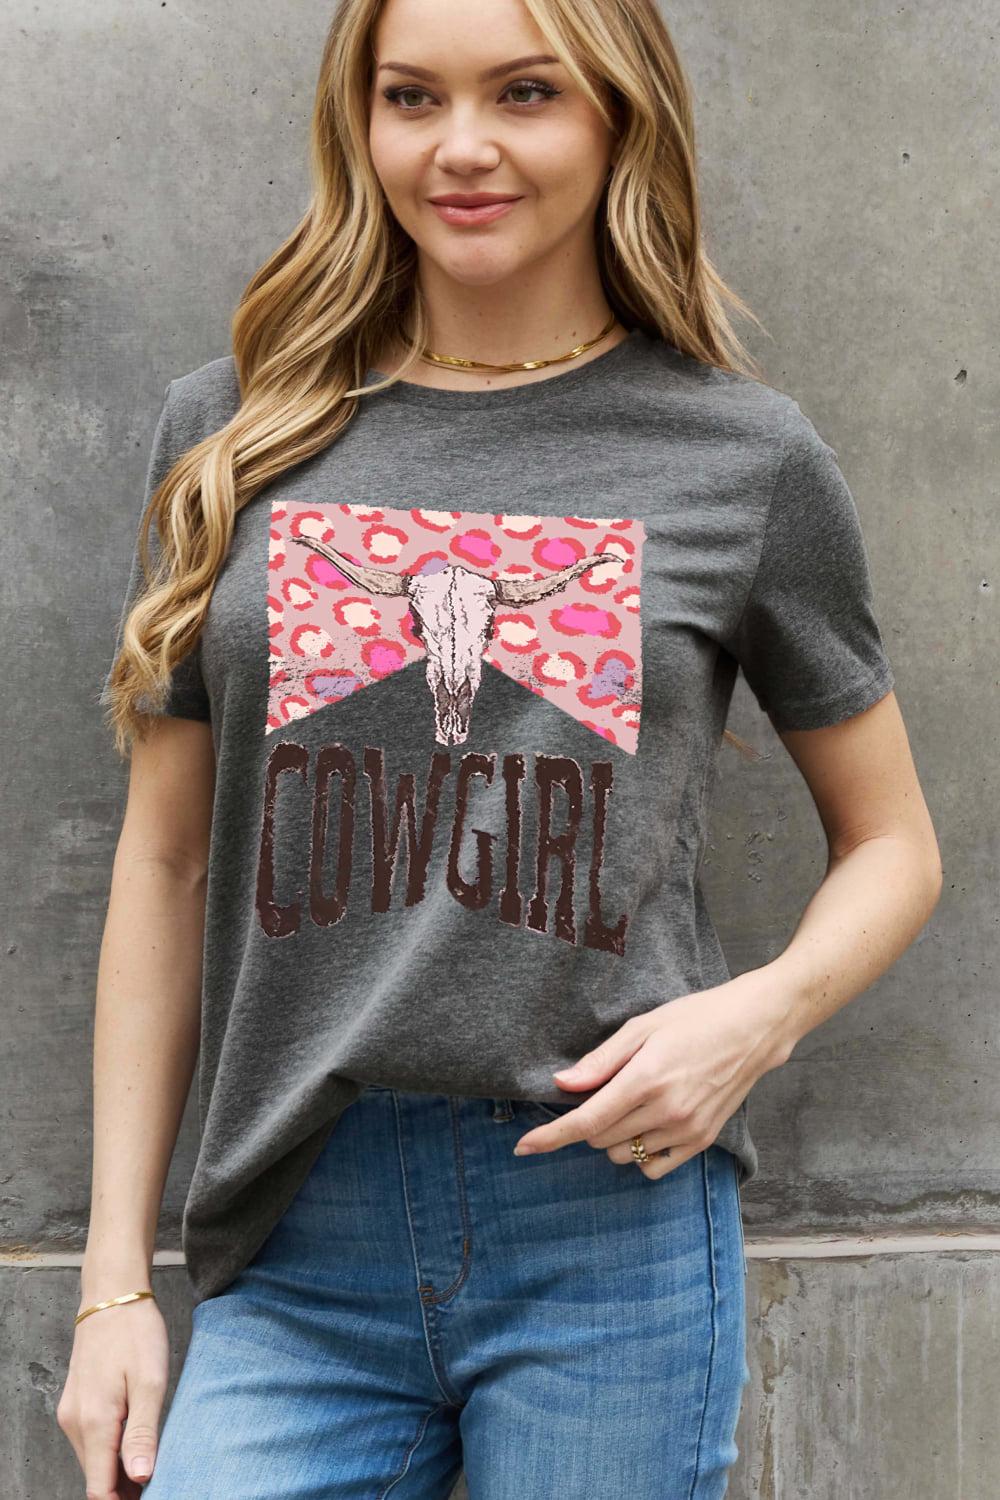 Simply Love Full Size COWGIRL Graphic Cotton Tee BLUE ZONE PLANET